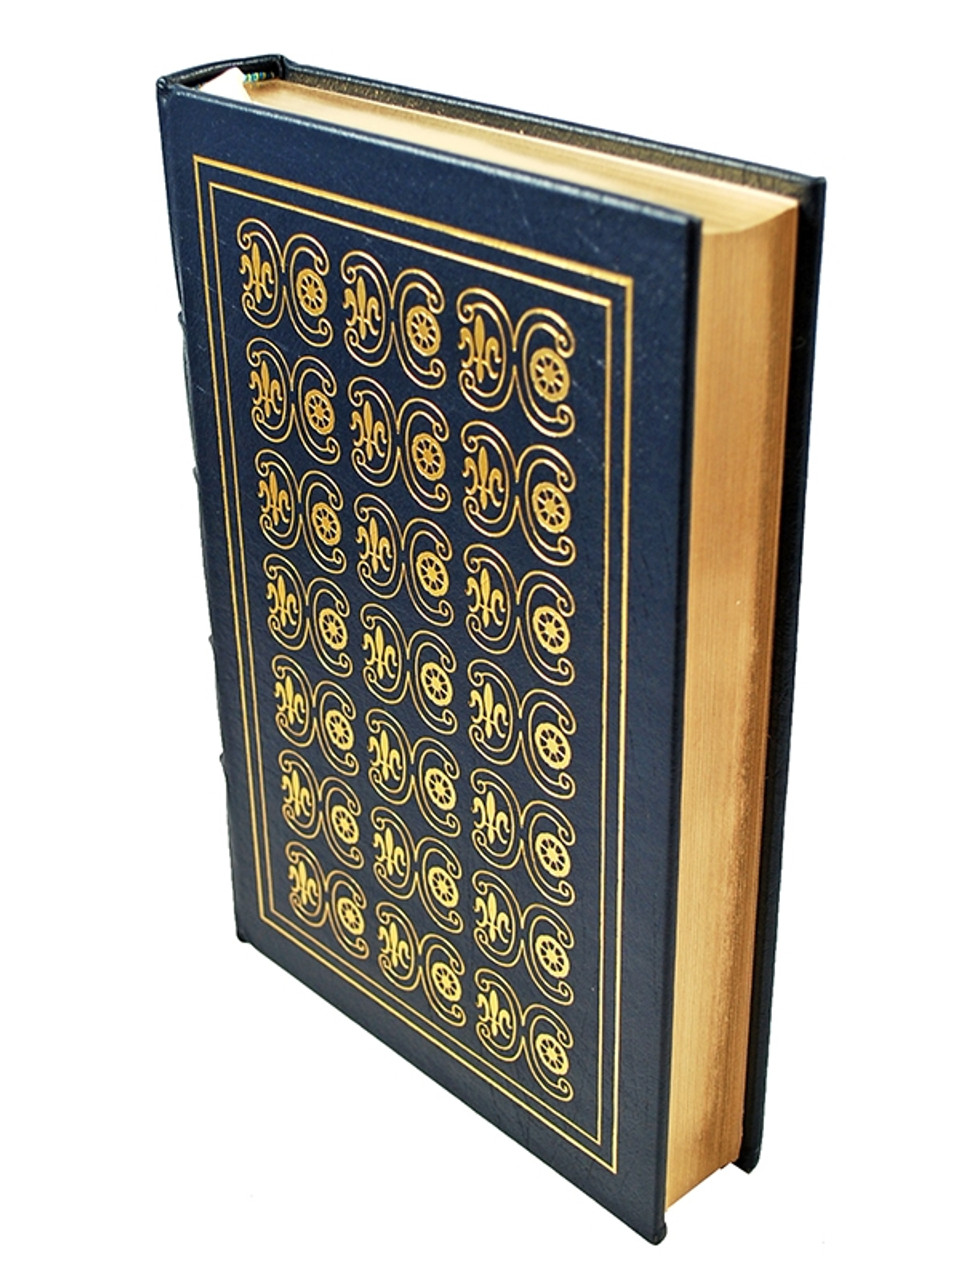 Easton Press, Thomas Carlyle "French Revolution" Leather Bound Collector's Edition